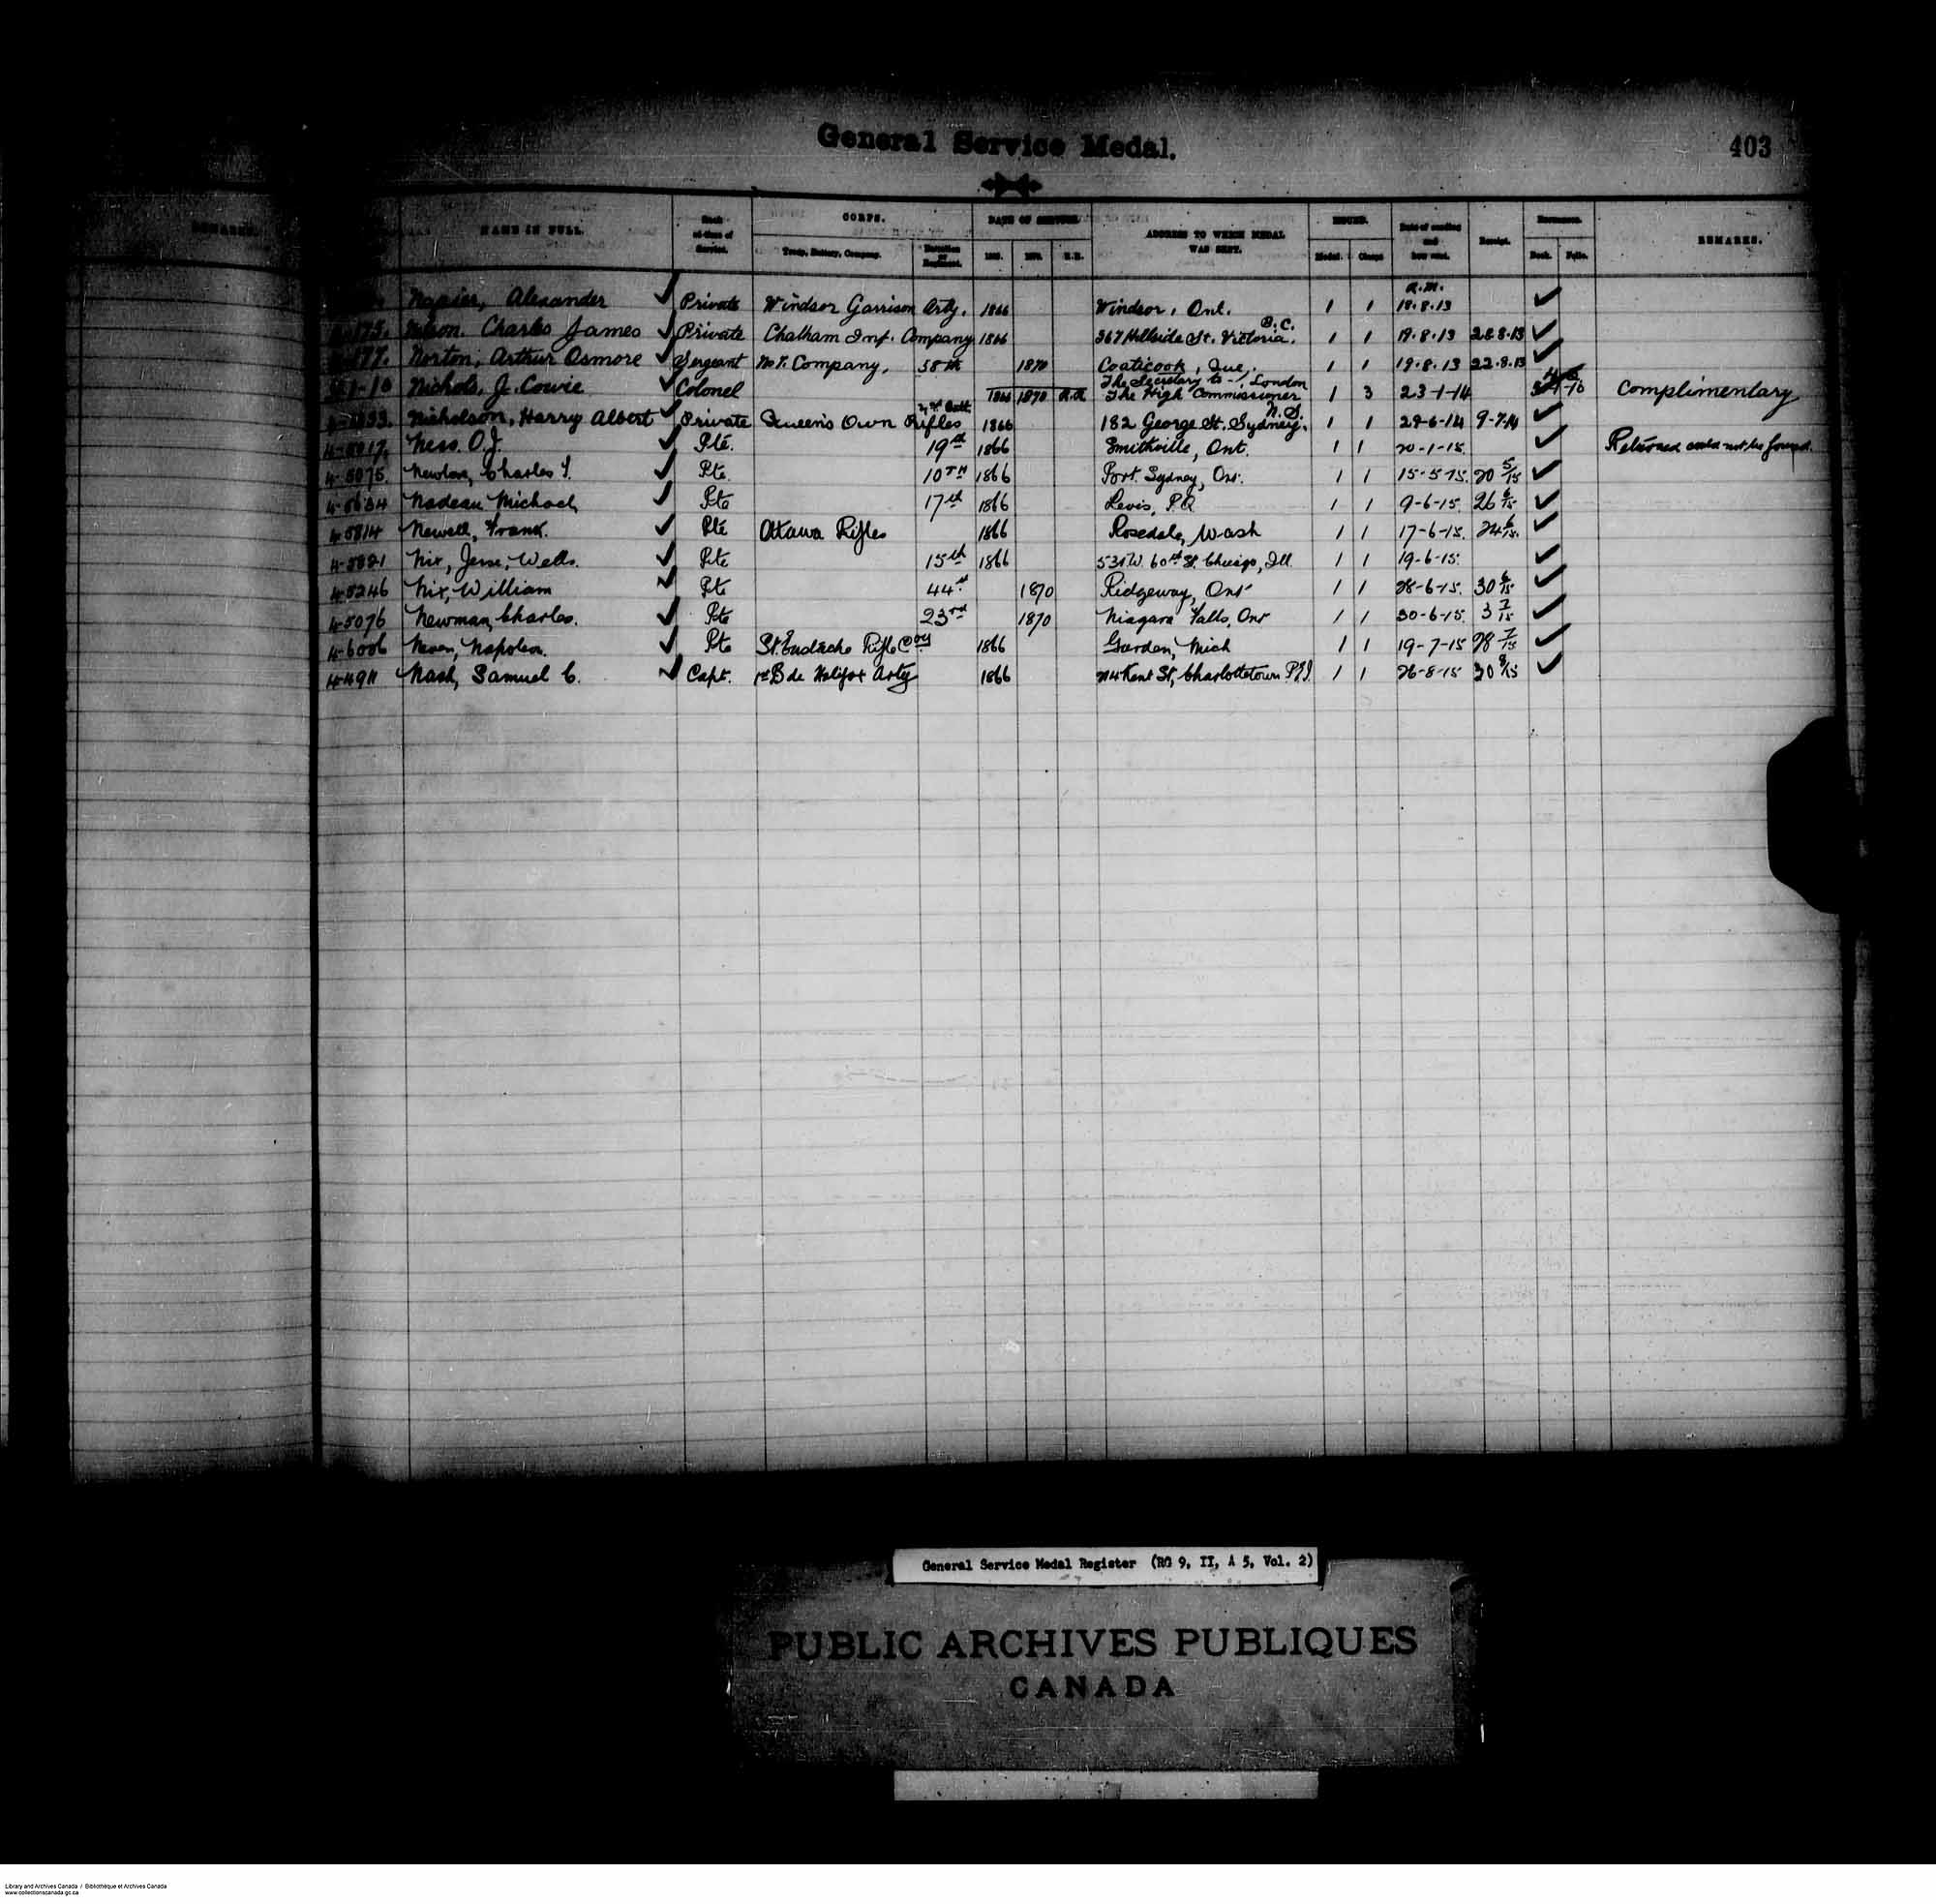 Digitized page of Medals, Honours and Awards for Image No.: e008681332